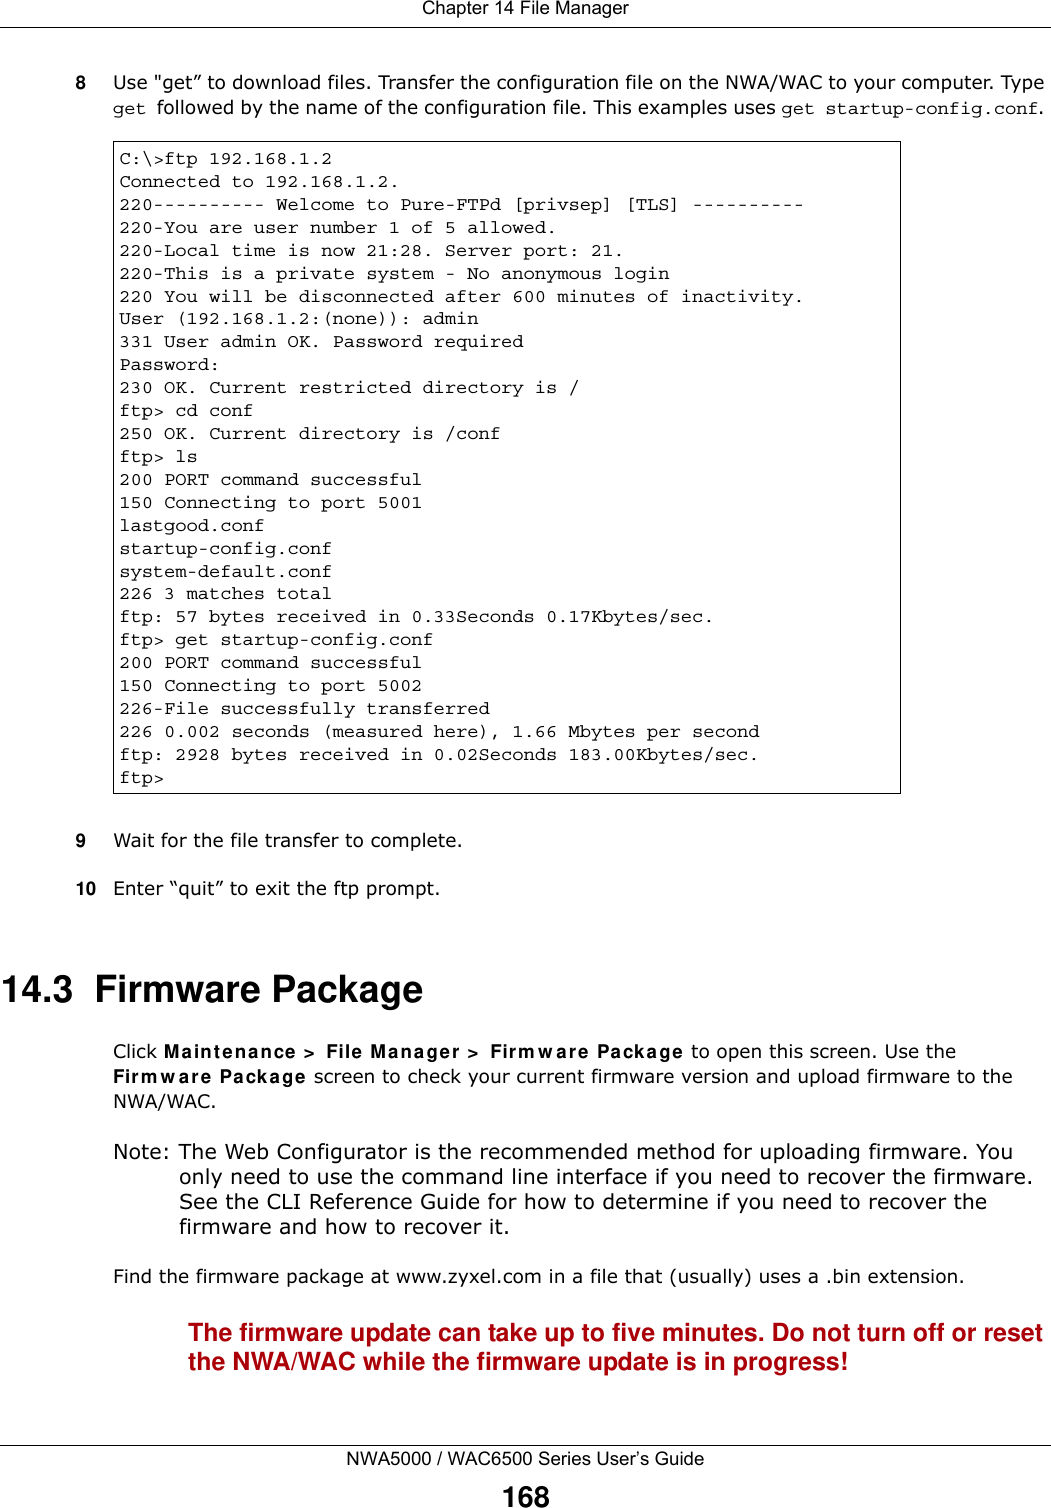 Chapter 14 File ManagerNWA5000 / WAC6500 Series User’s Guide1688Use &quot;get” to download files. Transfer the configuration file on the NWA/WAC to your computer. Type get followed by the name of the configuration file. This examples uses get startup-config.conf. 9Wait for the file transfer to complete.10 Enter “quit” to exit the ftp prompt.14.3  Firmware Package Click M ainte nance  &gt;  File M ana ger &gt;  Firm w are  Packa ge to open this screen. Use the Fir m w a re Pa cka ge screen to check your current firmware version and upload firmware to the NWA/WAC.Note: The Web Configurator is the recommended method for uploading firmware. You only need to use the command line interface if you need to recover the firmware. See the CLI Reference Guide for how to determine if you need to recover the firmware and how to recover it.Find the firmware package at www.zyxel.com in a file that (usually) uses a .bin extension. The firmware update can take up to five minutes. Do not turn off or reset the NWA/WAC while the firmware update is in progress!C:\&gt;ftp 192.168.1.2Connected to 192.168.1.2.220---------- Welcome to Pure-FTPd [privsep] [TLS] ----------220-You are user number 1 of 5 allowed.220-Local time is now 21:28. Server port: 21.220-This is a private system - No anonymous login220 You will be disconnected after 600 minutes of inactivity.User (192.168.1.2:(none)): admin331 User admin OK. Password requiredPassword:230 OK. Current restricted directory is /ftp&gt; cd conf250 OK. Current directory is /confftp&gt; ls200 PORT command successful150 Connecting to port 5001lastgood.confstartup-config.confsystem-default.conf226 3 matches totalftp: 57 bytes received in 0.33Seconds 0.17Kbytes/sec.ftp&gt; get startup-config.conf200 PORT command successful150 Connecting to port 5002226-File successfully transferred226 0.002 seconds (measured here), 1.66 Mbytes per secondftp: 2928 bytes received in 0.02Seconds 183.00Kbytes/sec.ftp&gt;